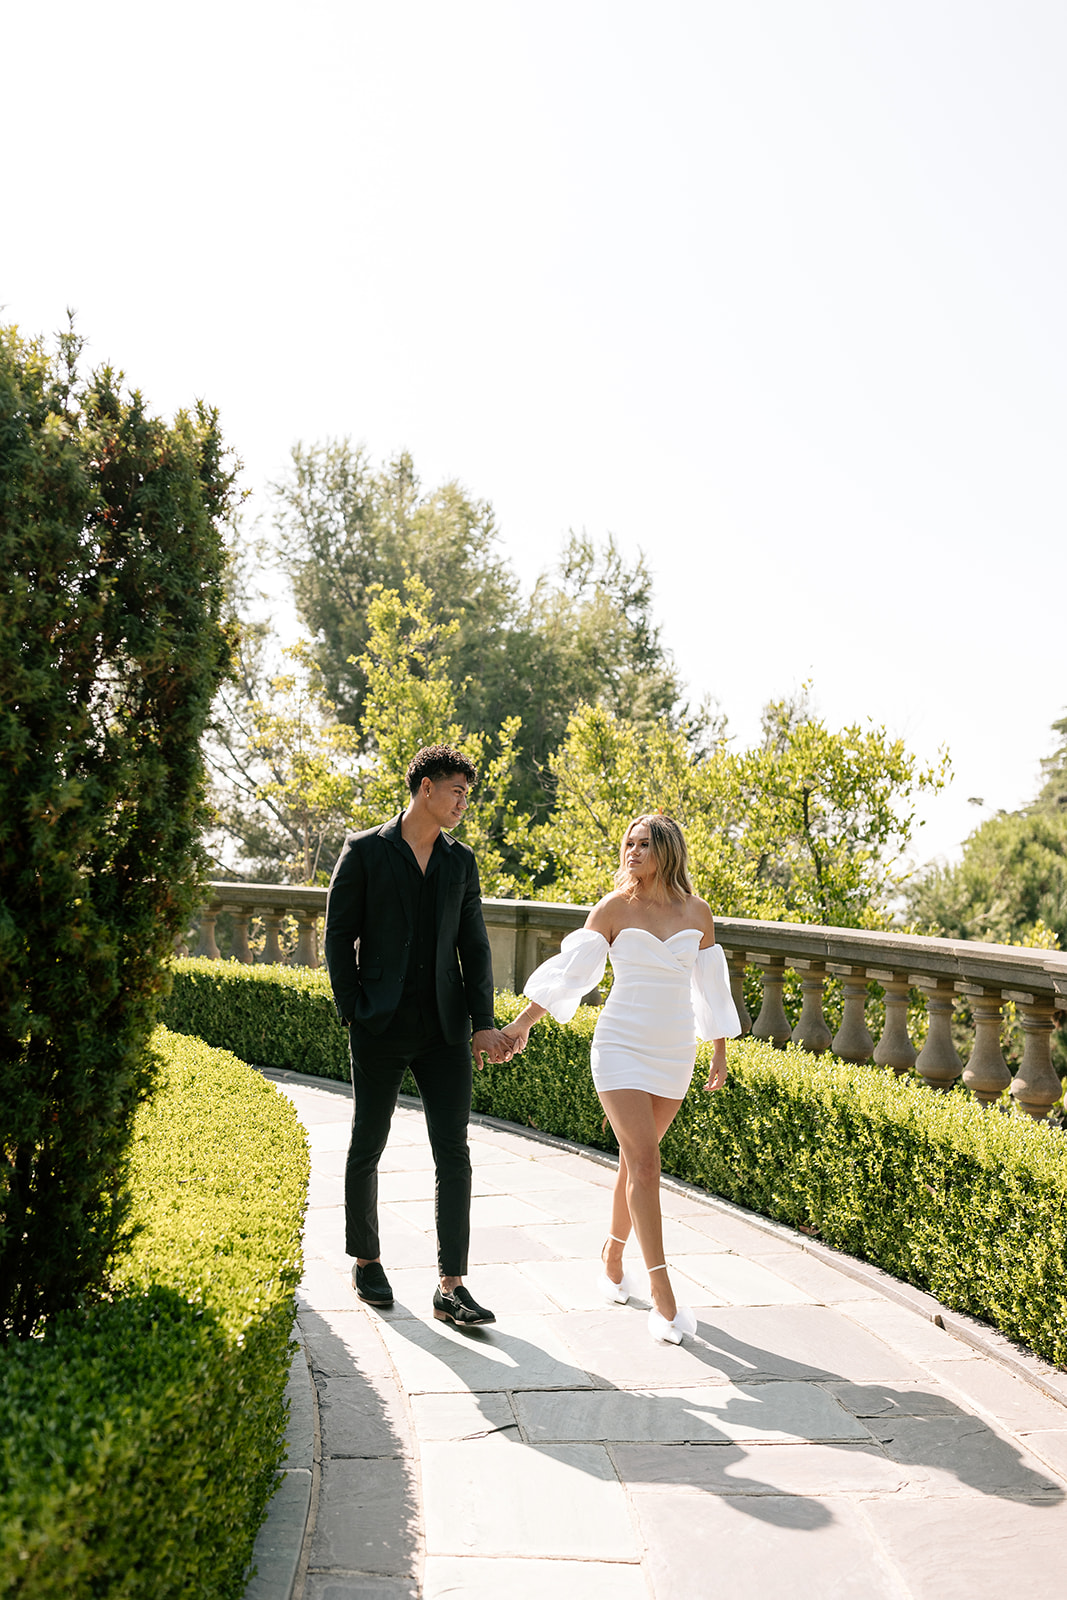 greystone mansion beverly hills los angeles southern california engagement couples photography photoshoot poses